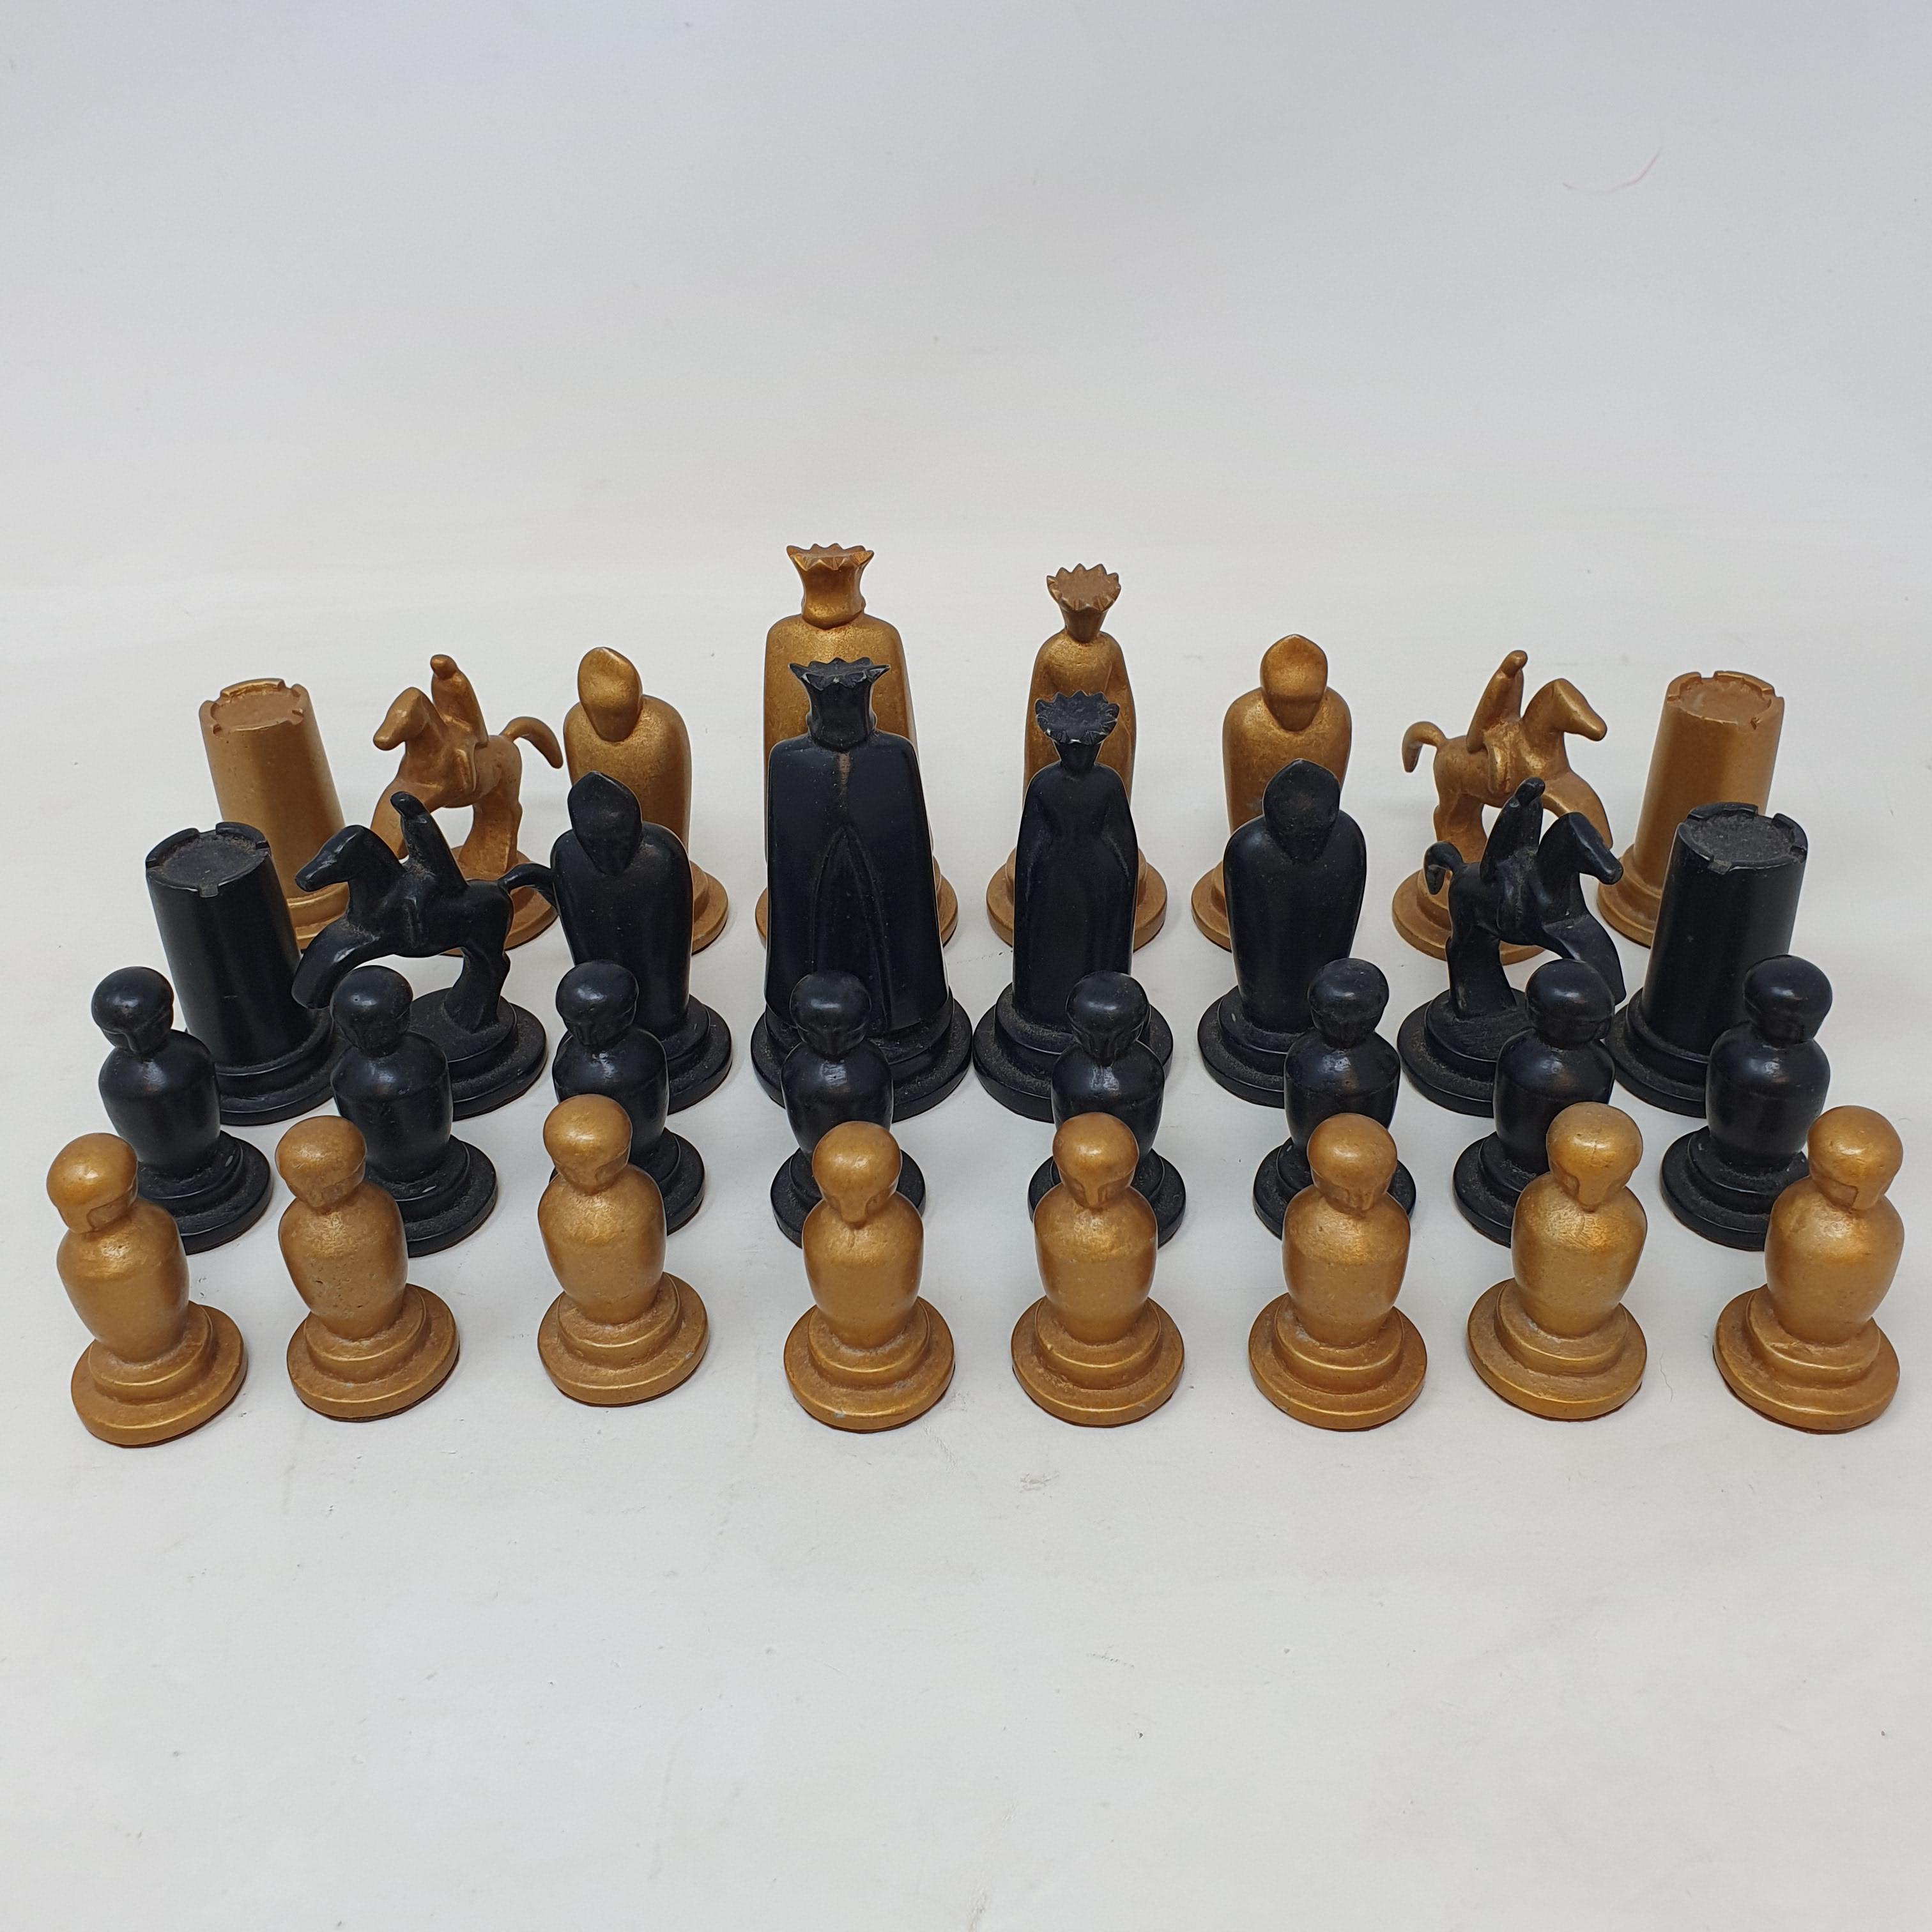 A Modernist chess set, by repute cast from aluminium/duralumin from a Spitfire, the king 8.5 cm high